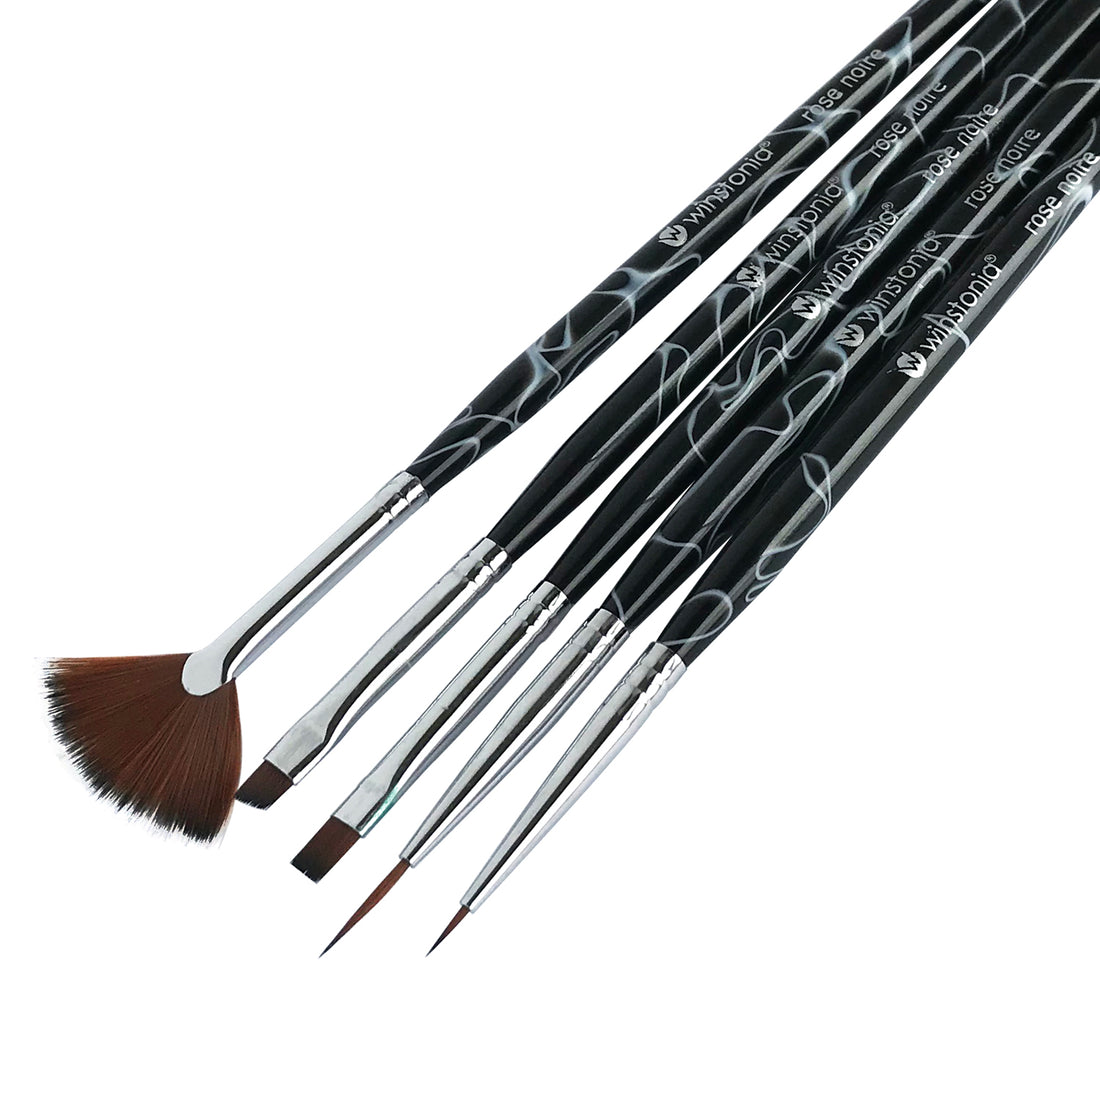 Set of 3 Nail Art Brushes with lids – MagpieBeautyUSA